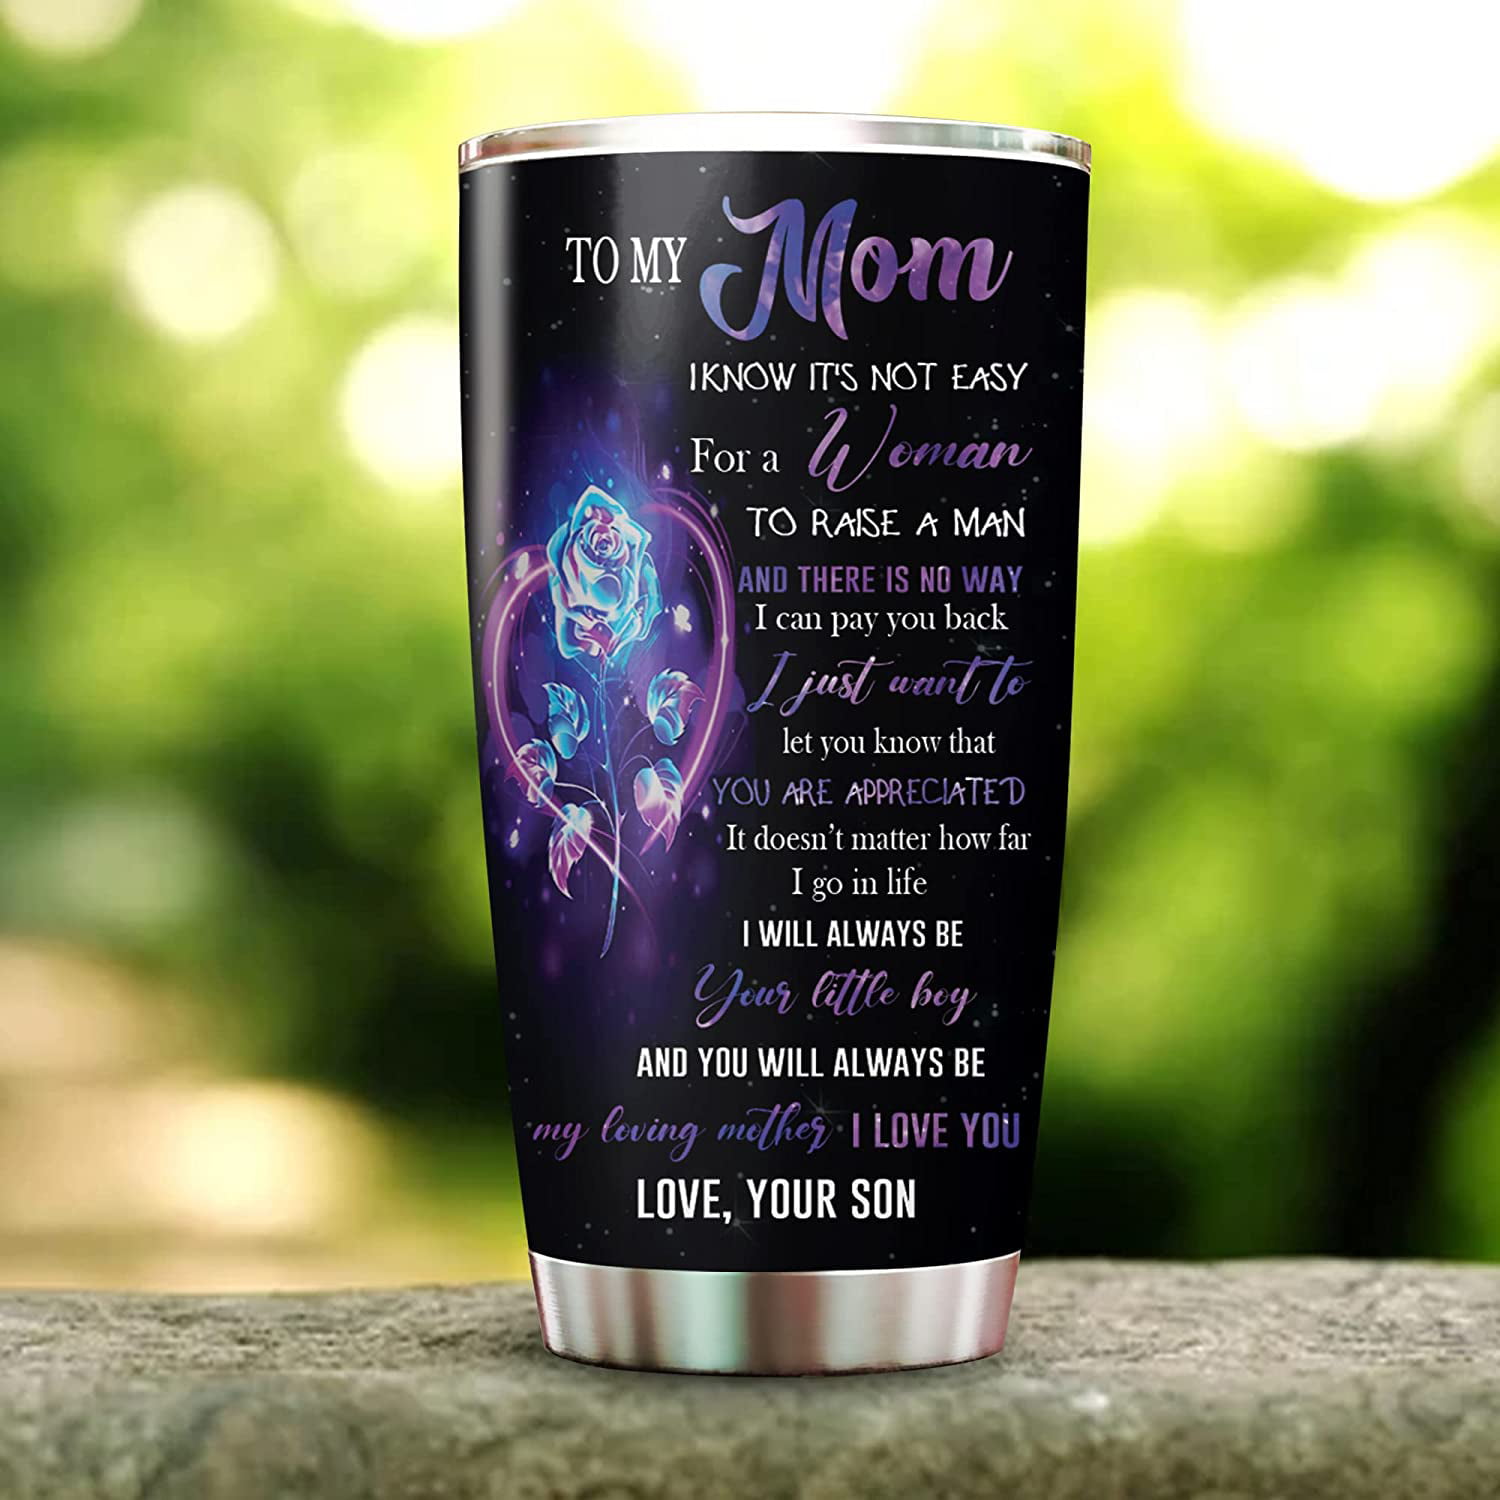 35 Hilarious Mom Gifts That Will Uplift a Weary Heart • MightyMoms